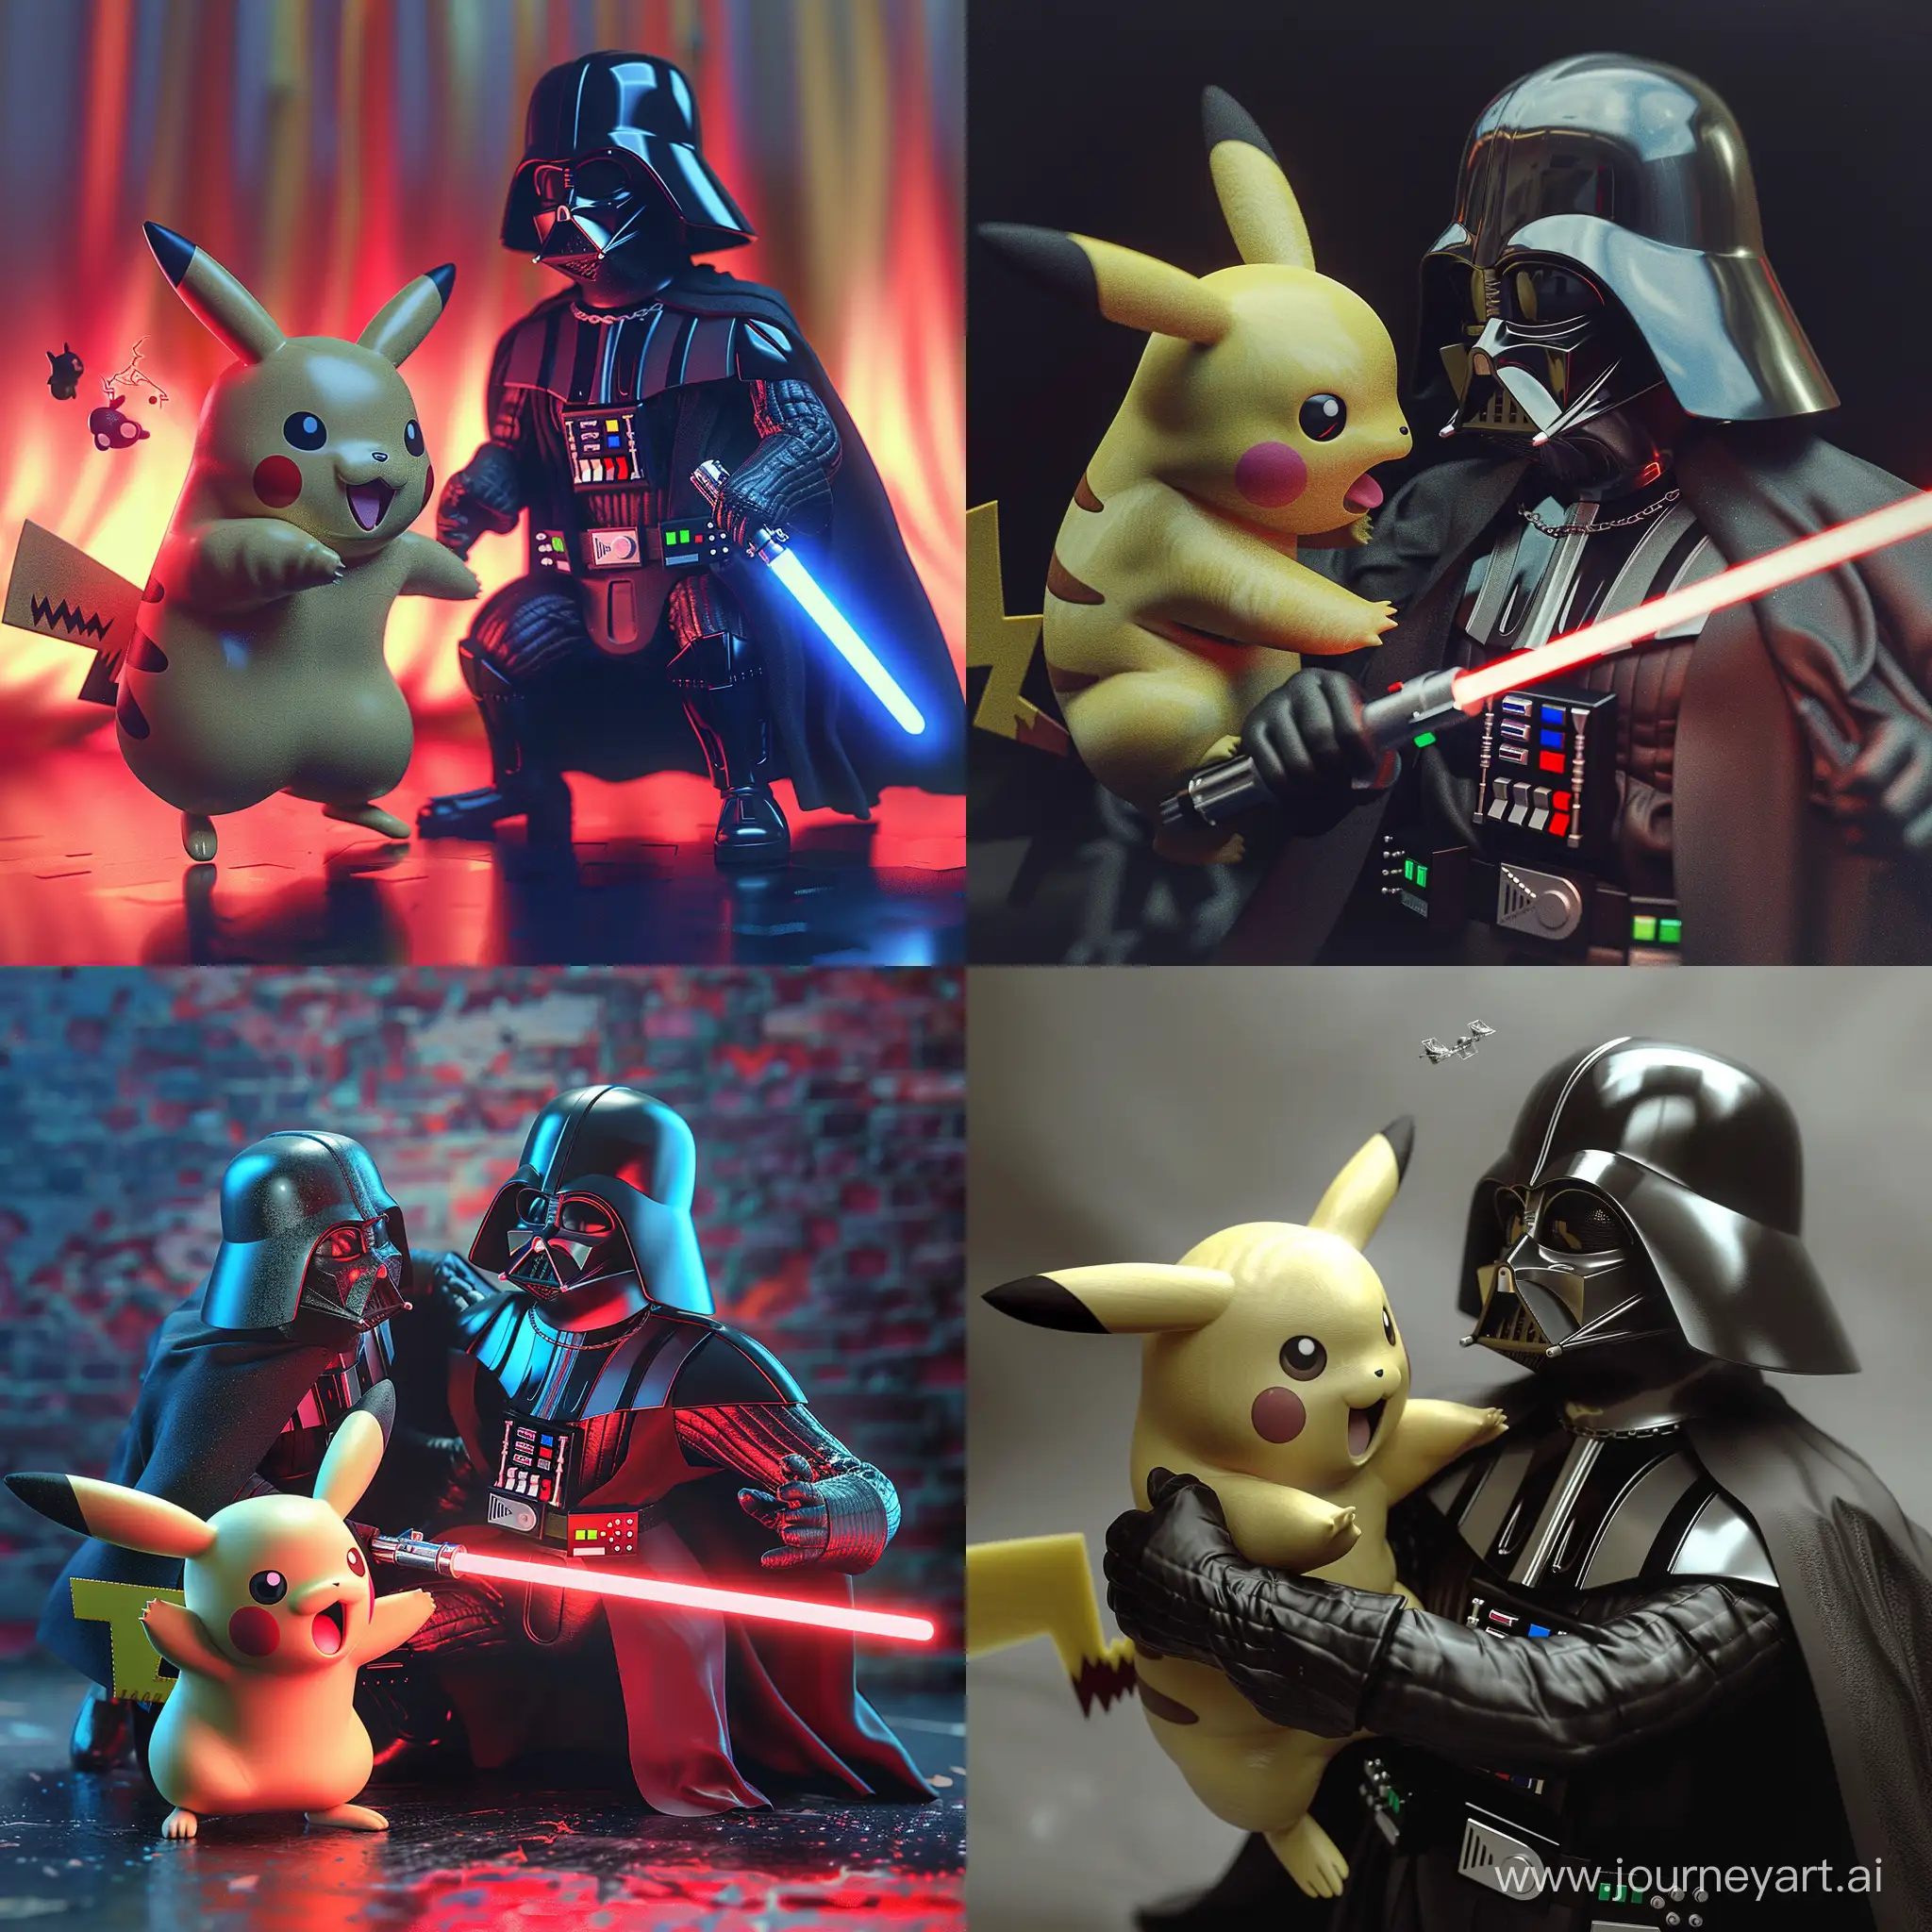 Epic-Battle-Pikachu-vs-Darth-Vader-in-Ultra-Realistic-and-Highly-Detailed-Scene-with-Natural-Lighting